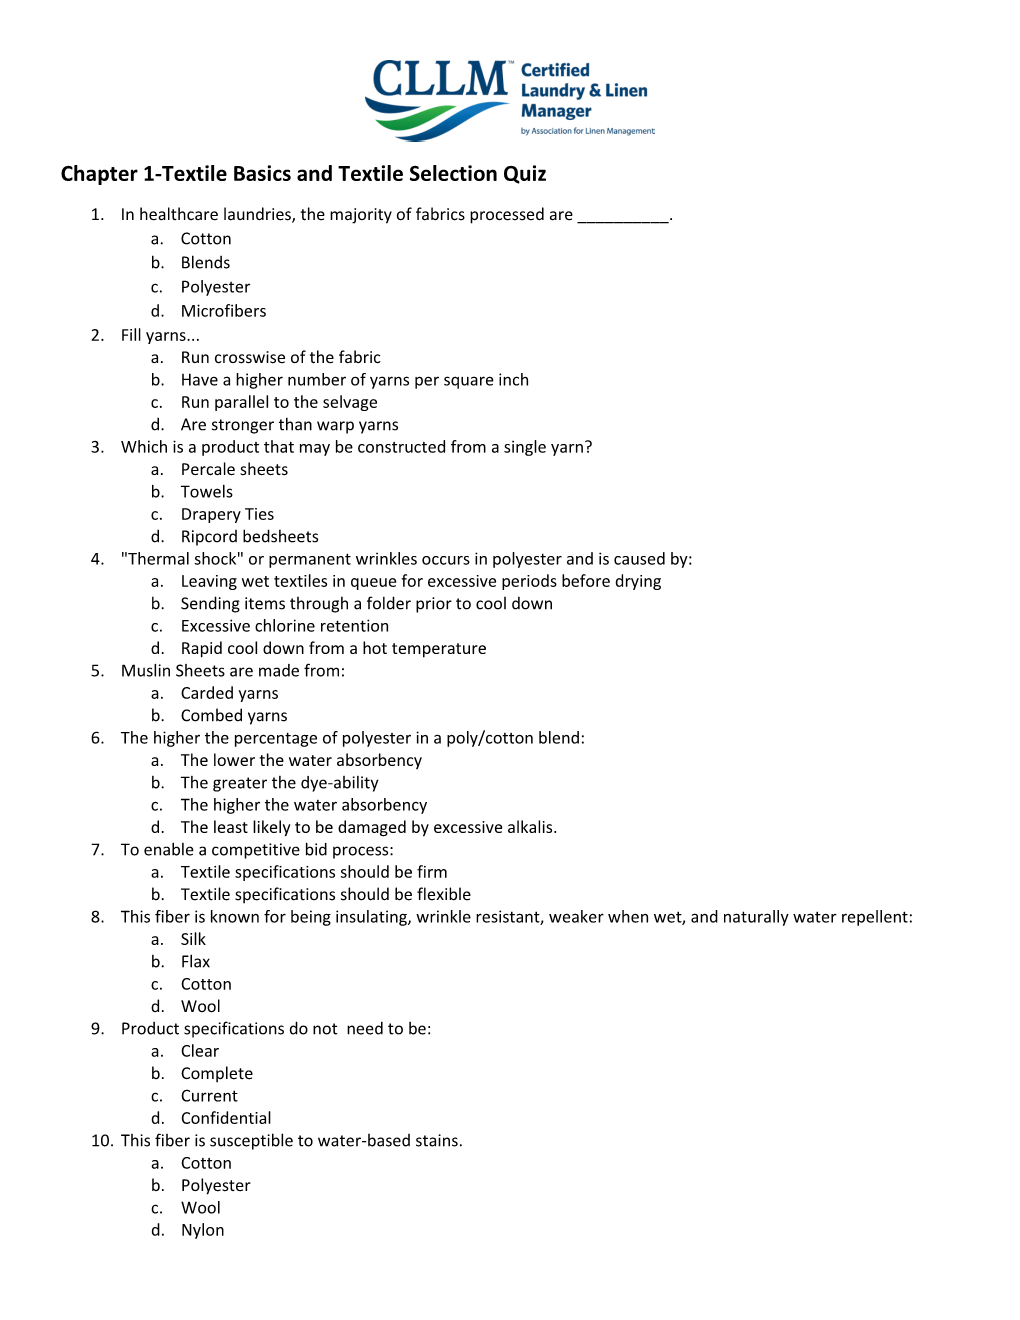 Chapter 1-Textile Basics and Textile Selection Quiz